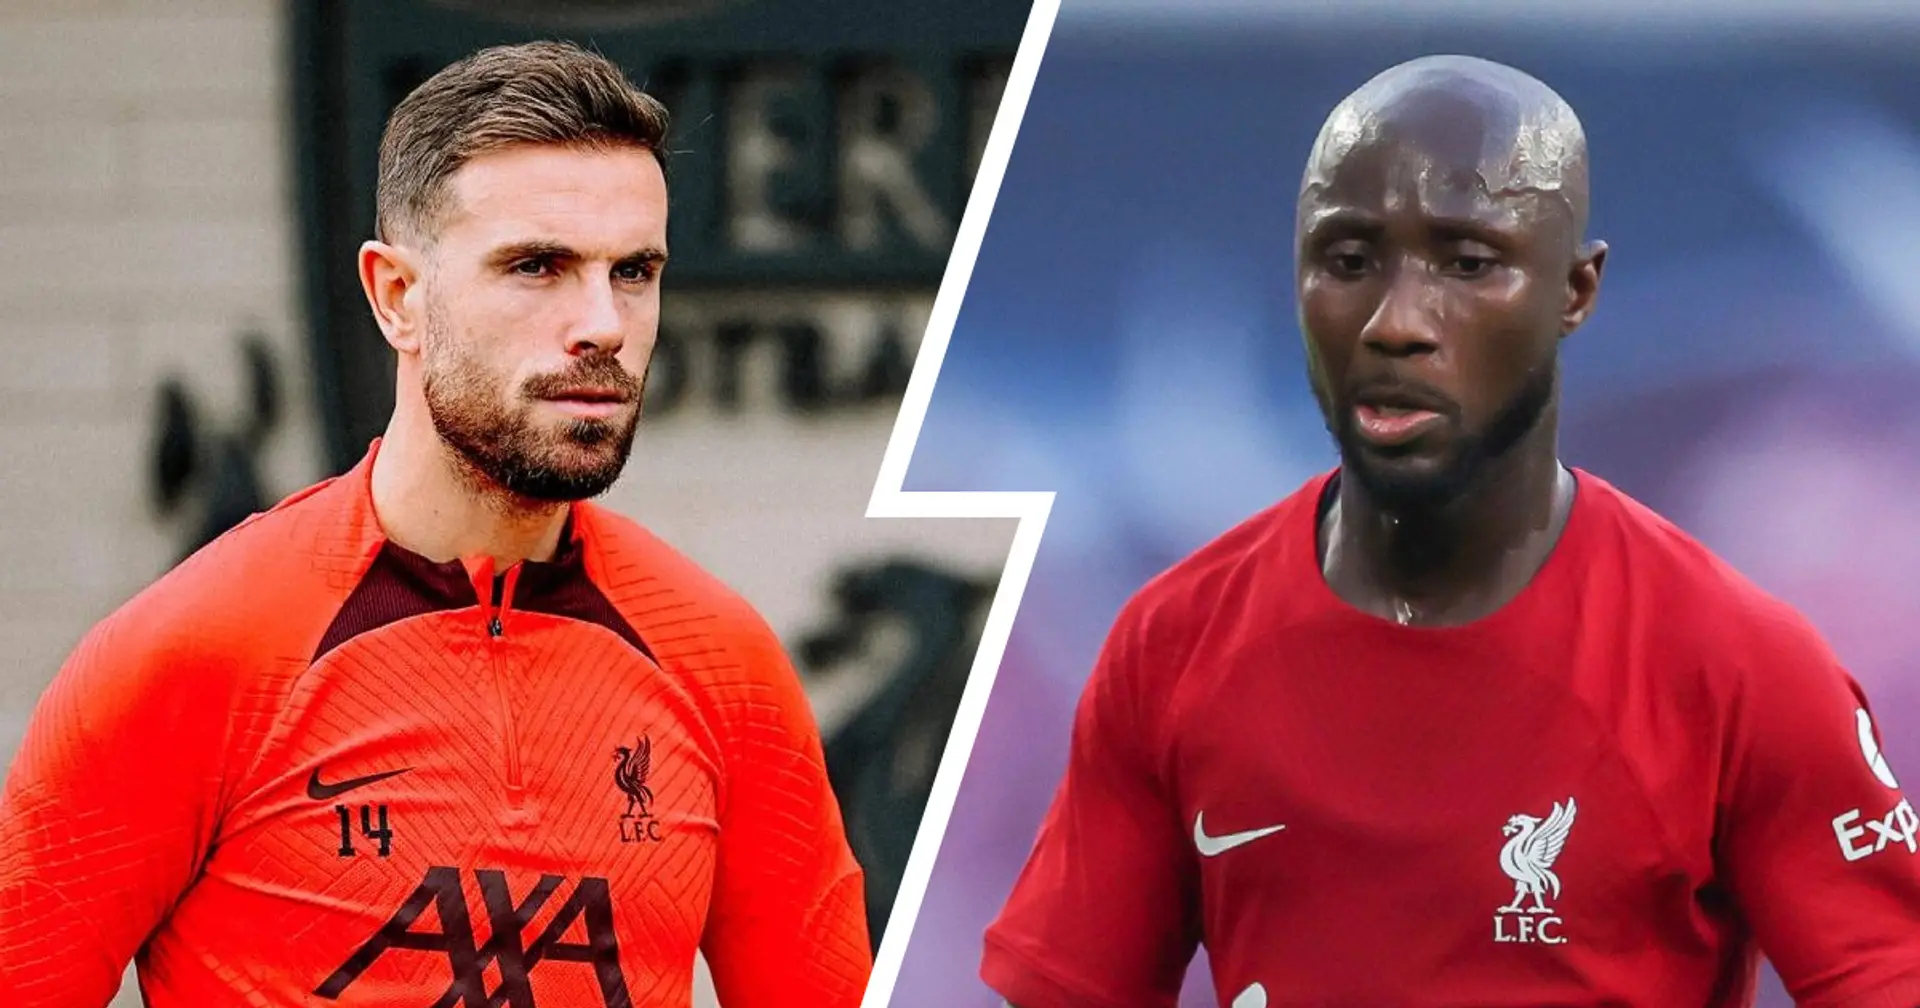 Henderson pictured in training after missing Brentford game, 3 players appear missing — including Keita